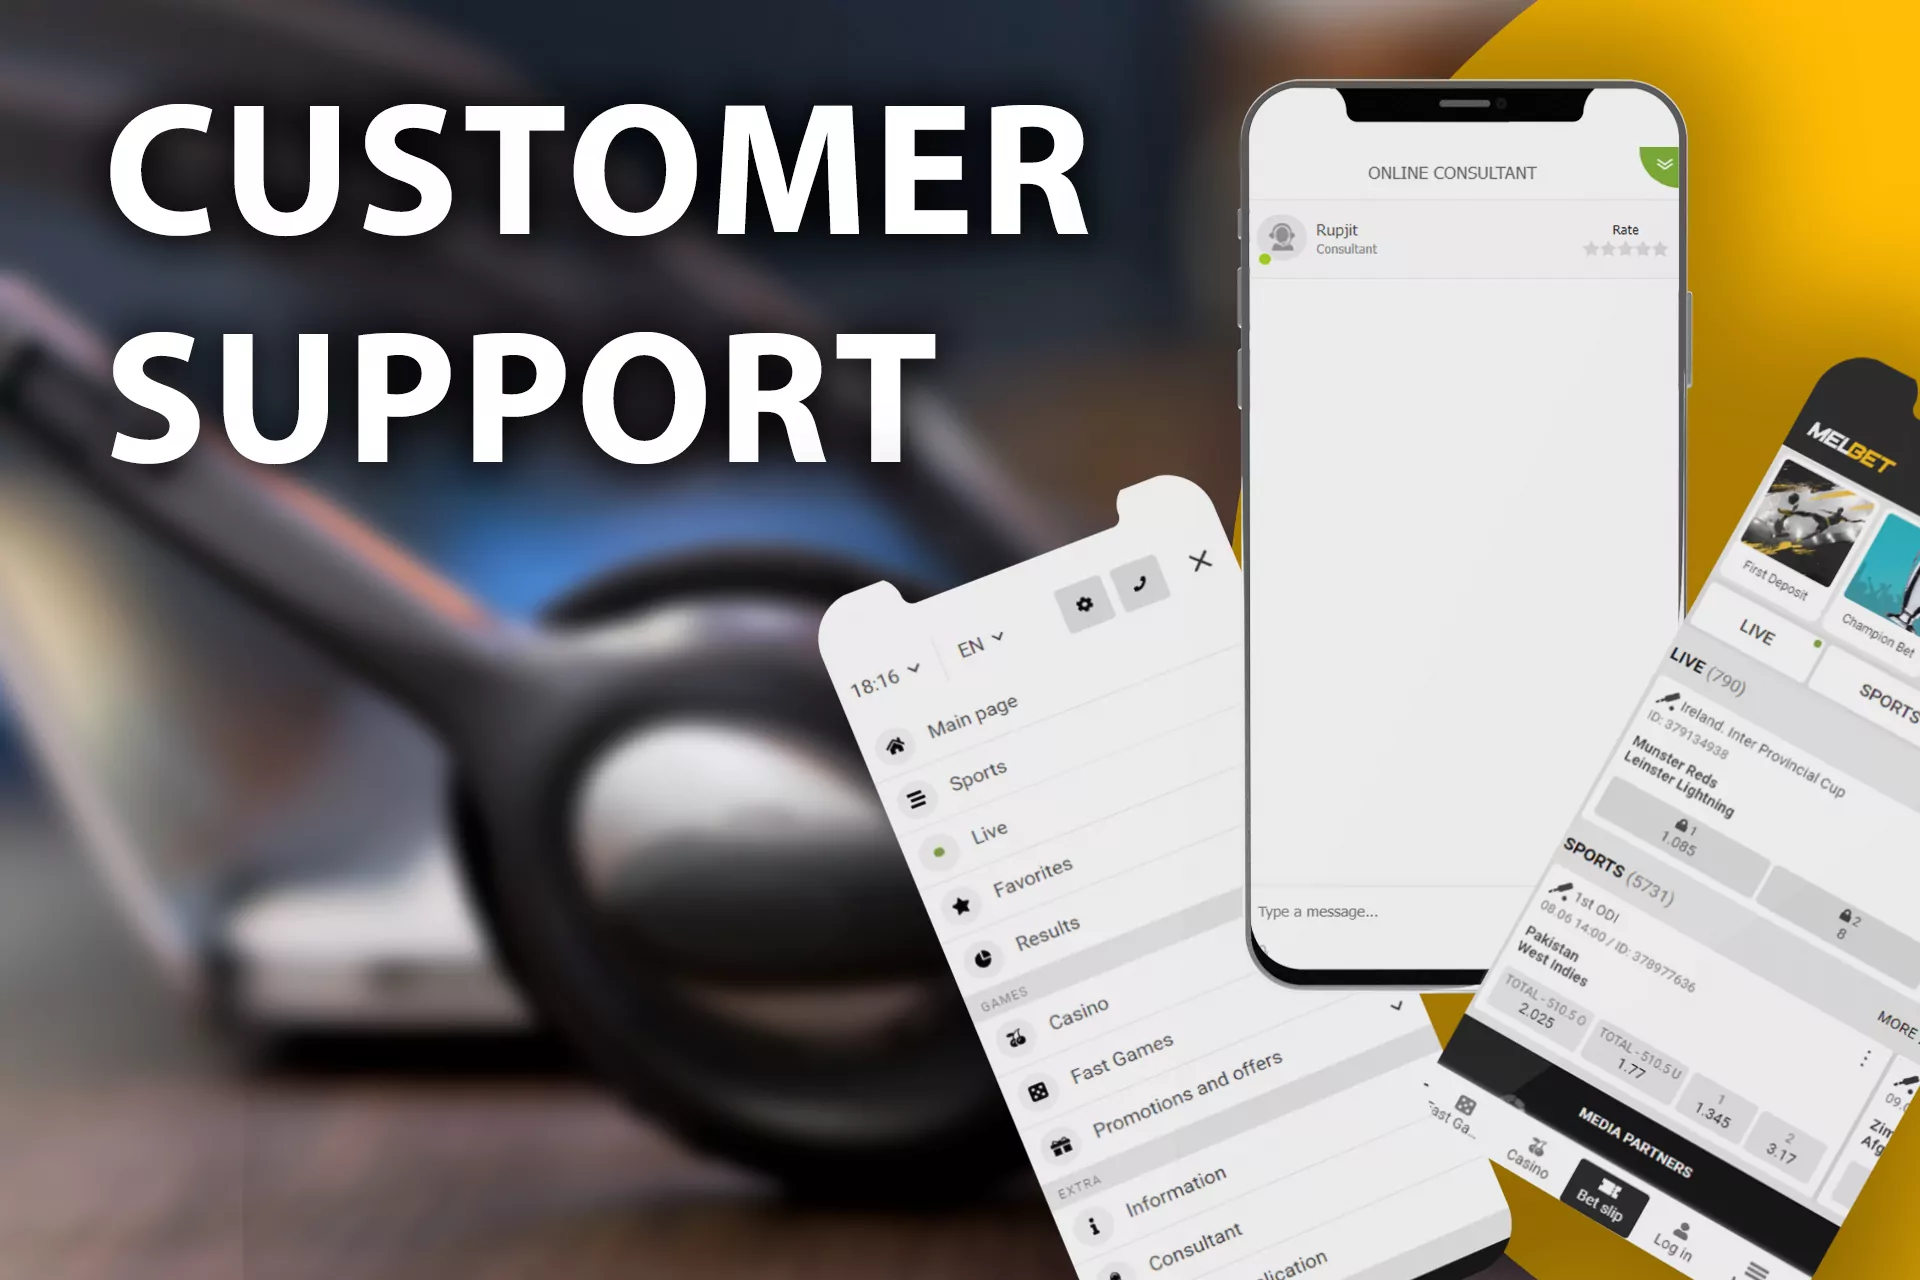 If you have issues with betting through the app, let customer support know.